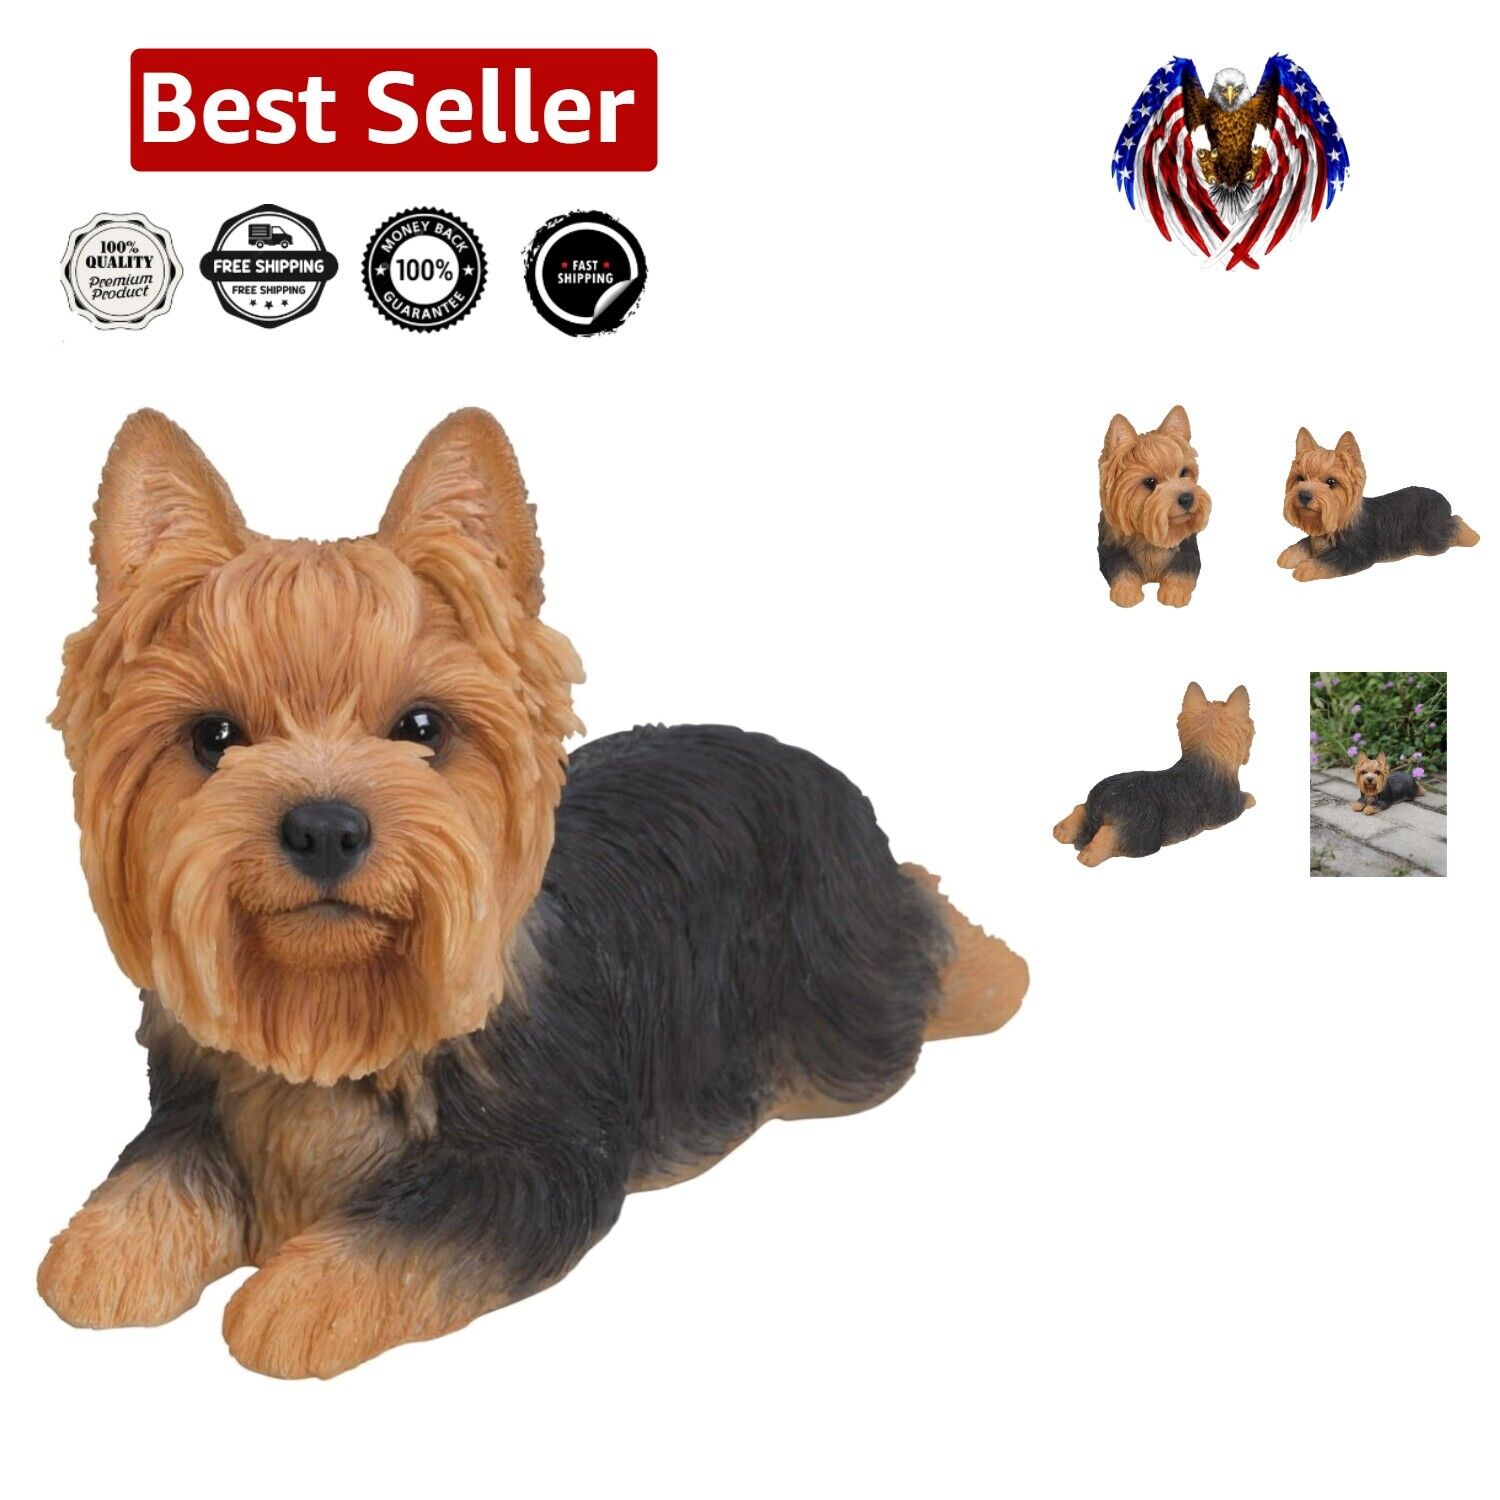 Polyresin Yorkshire Terrier Dog Sculpture for Year-Round Home and Garden Delight